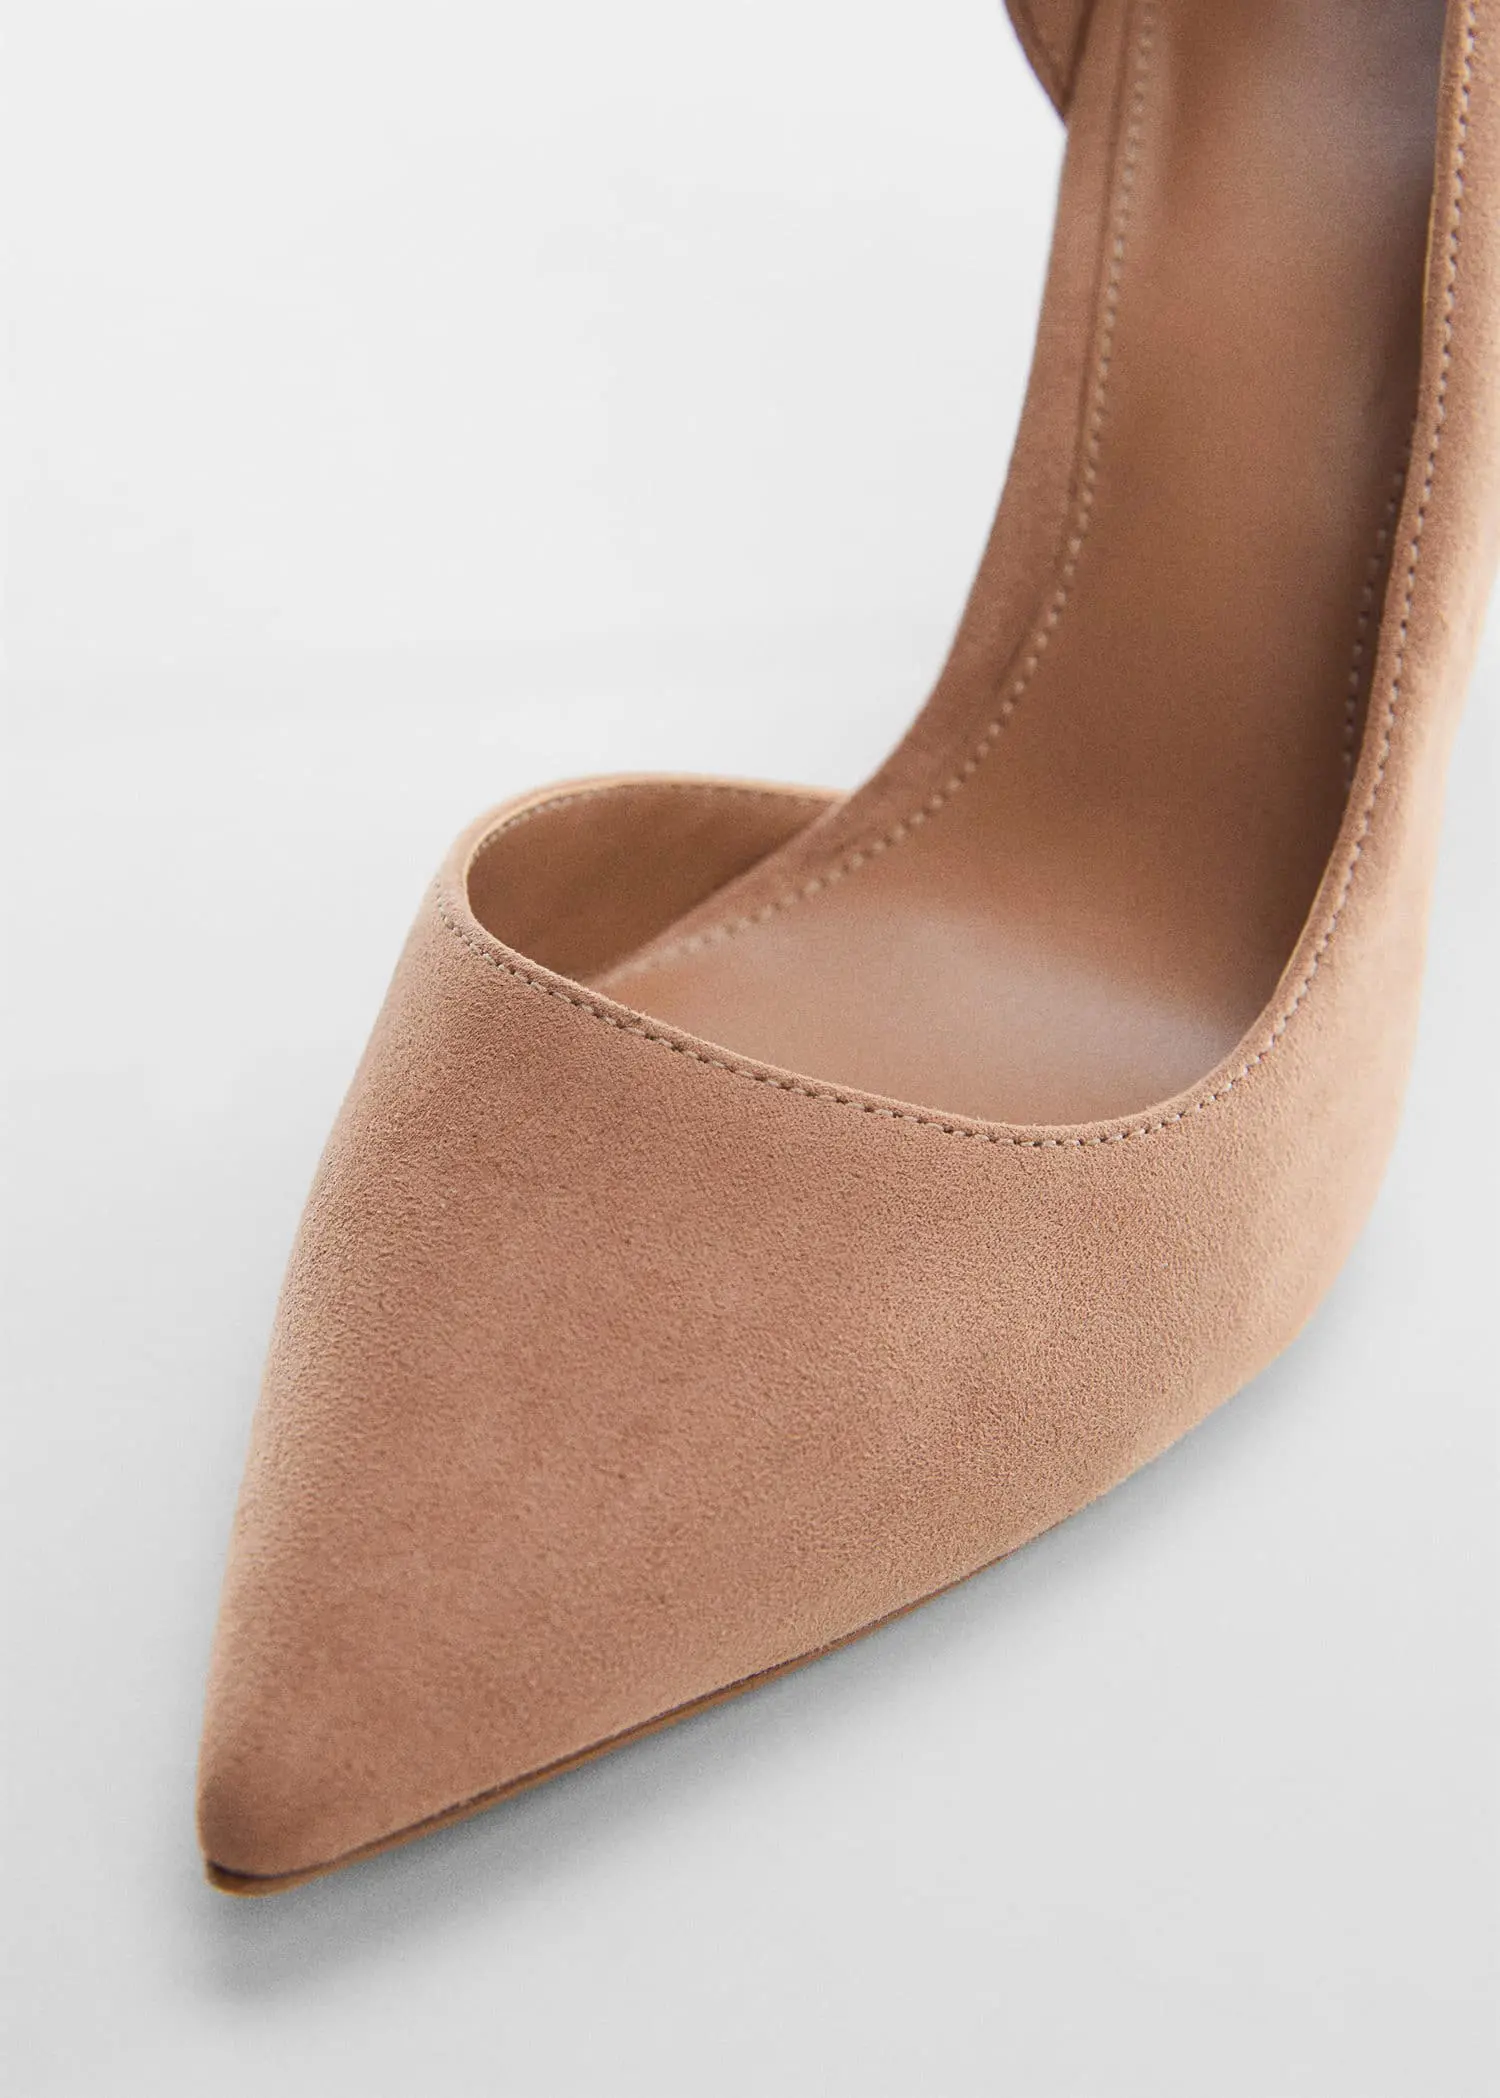 Mango Asymmetrical heeled shoes. a close up view of a pair of shoes. 